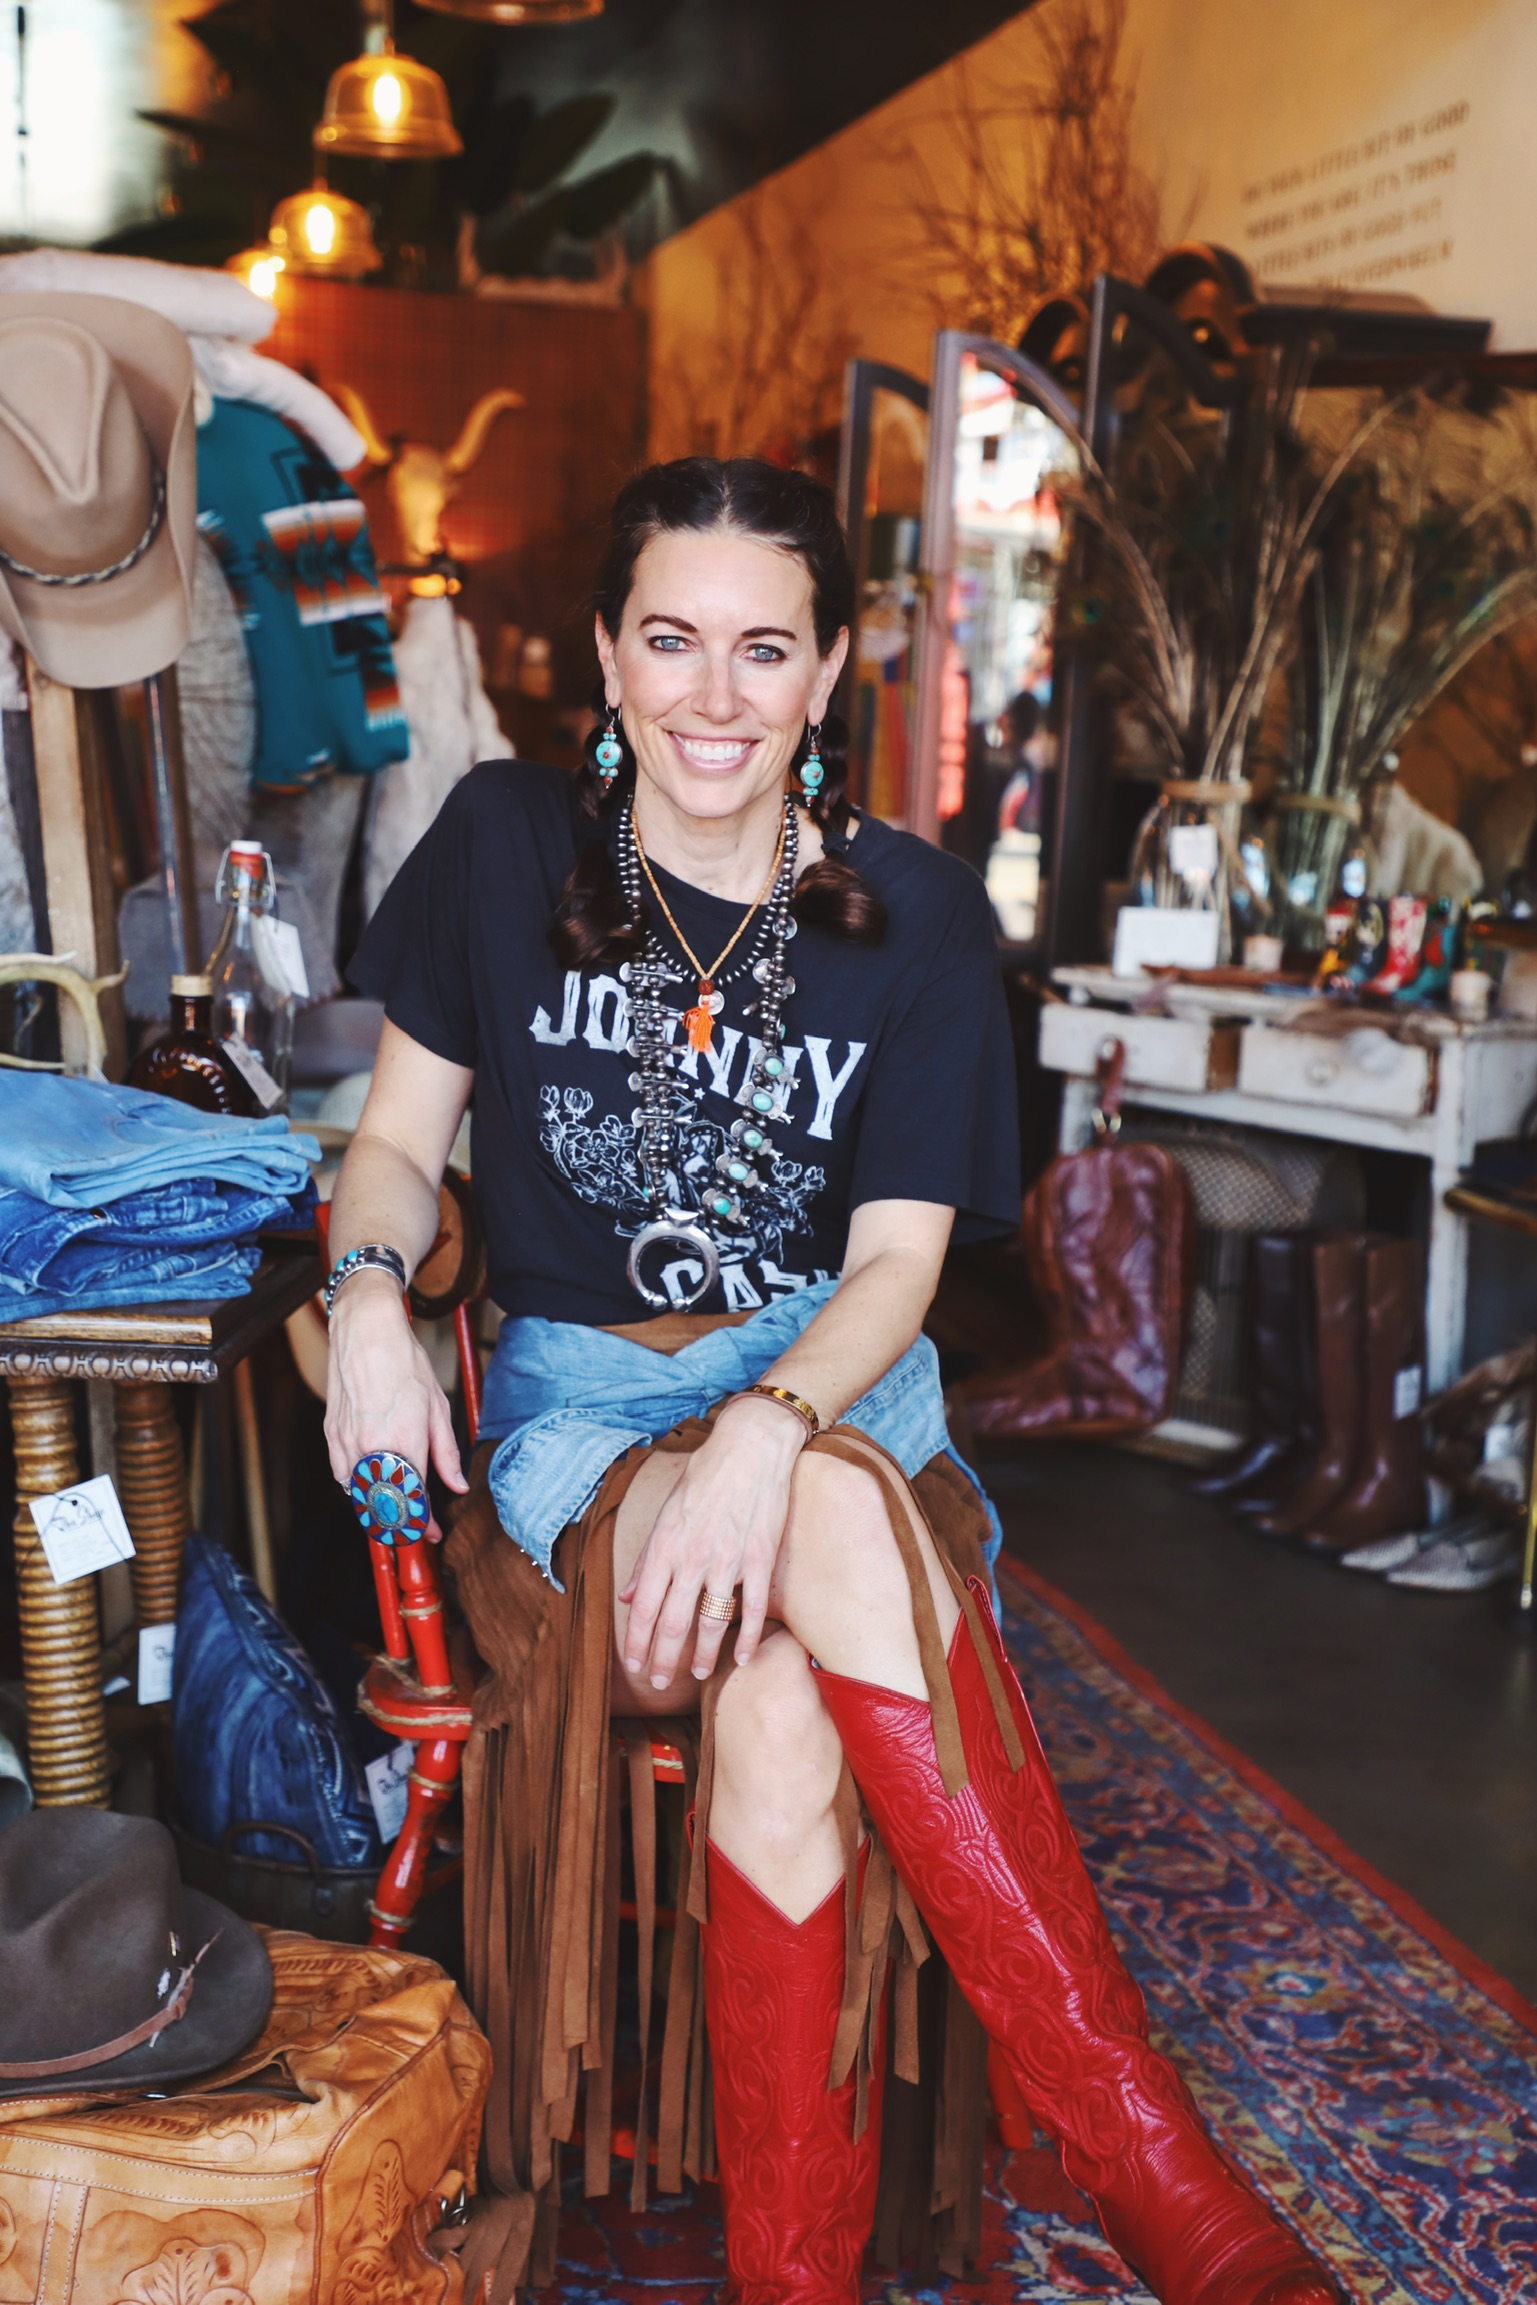 Western-wear business strong – The Denver Post